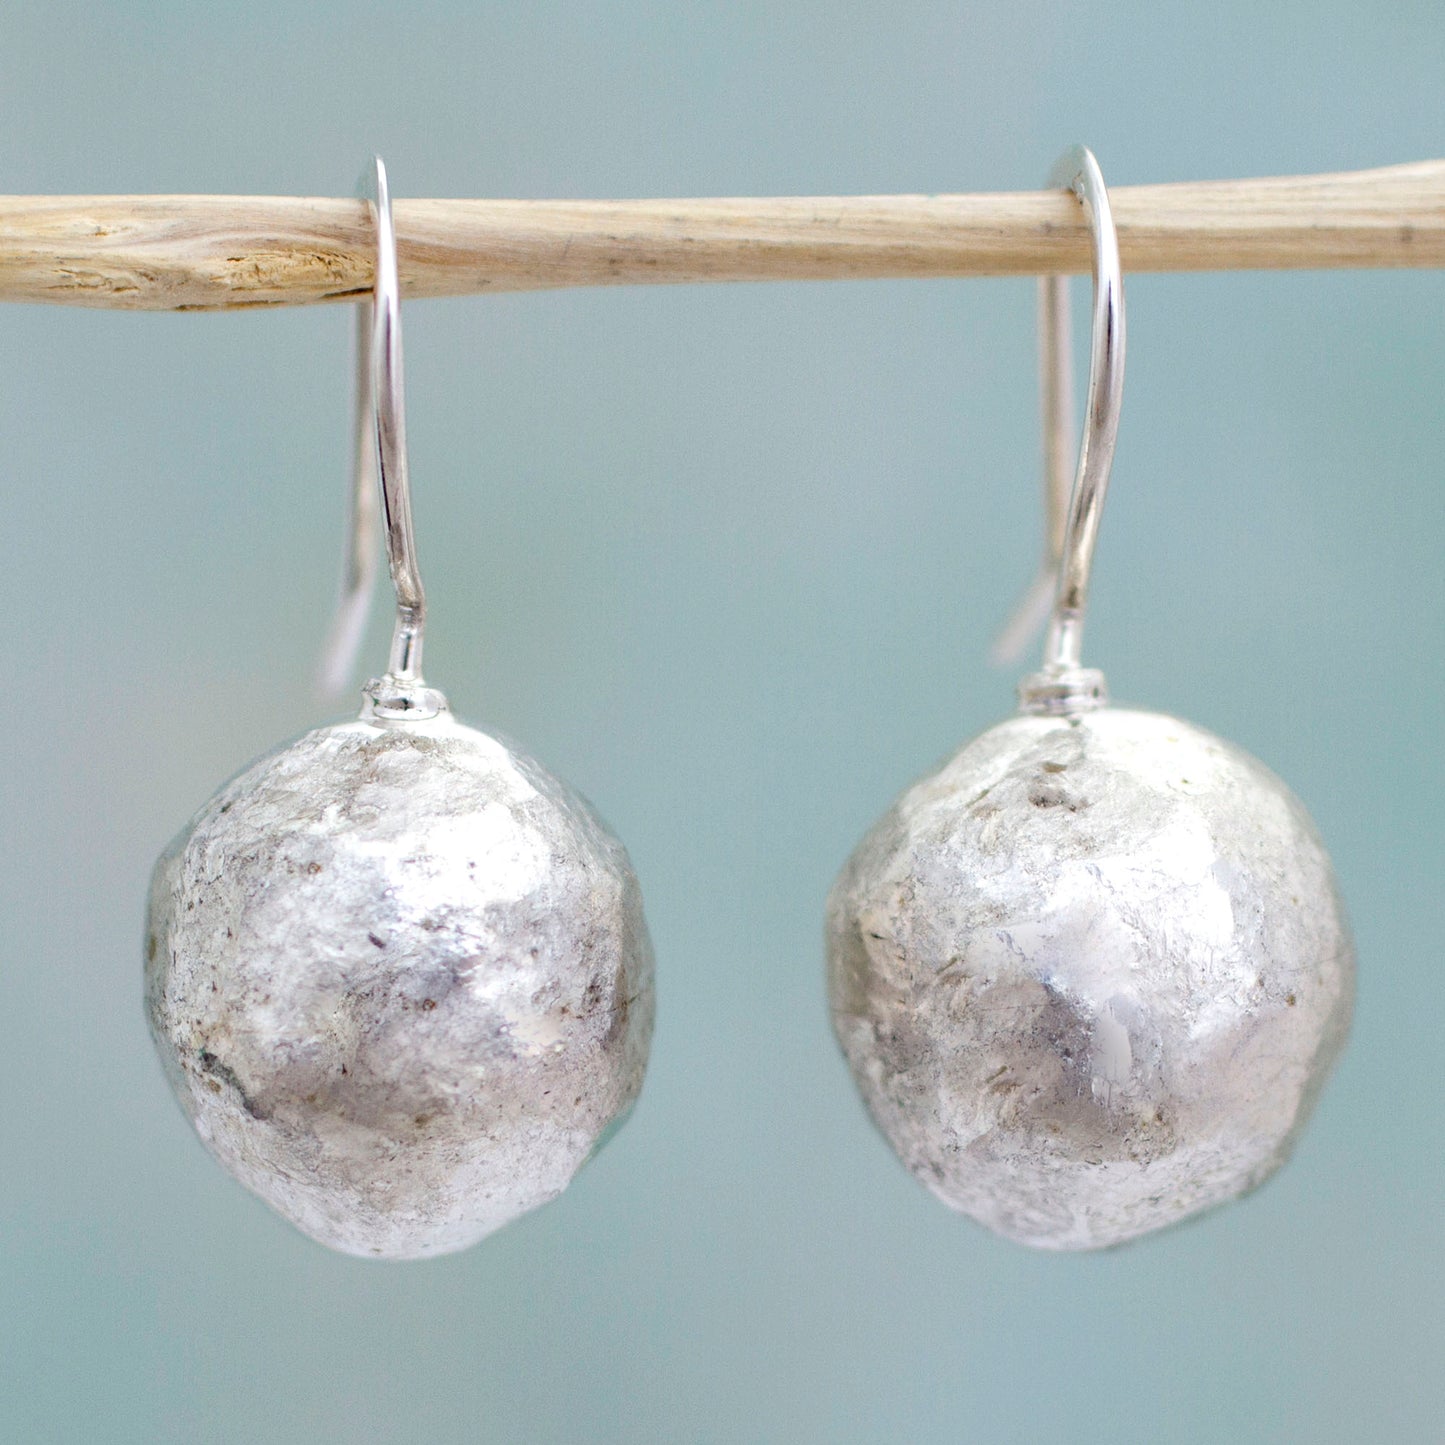 Nature's Treasures Hand Made Sterling Silver Round Drop Earrings from Mexico